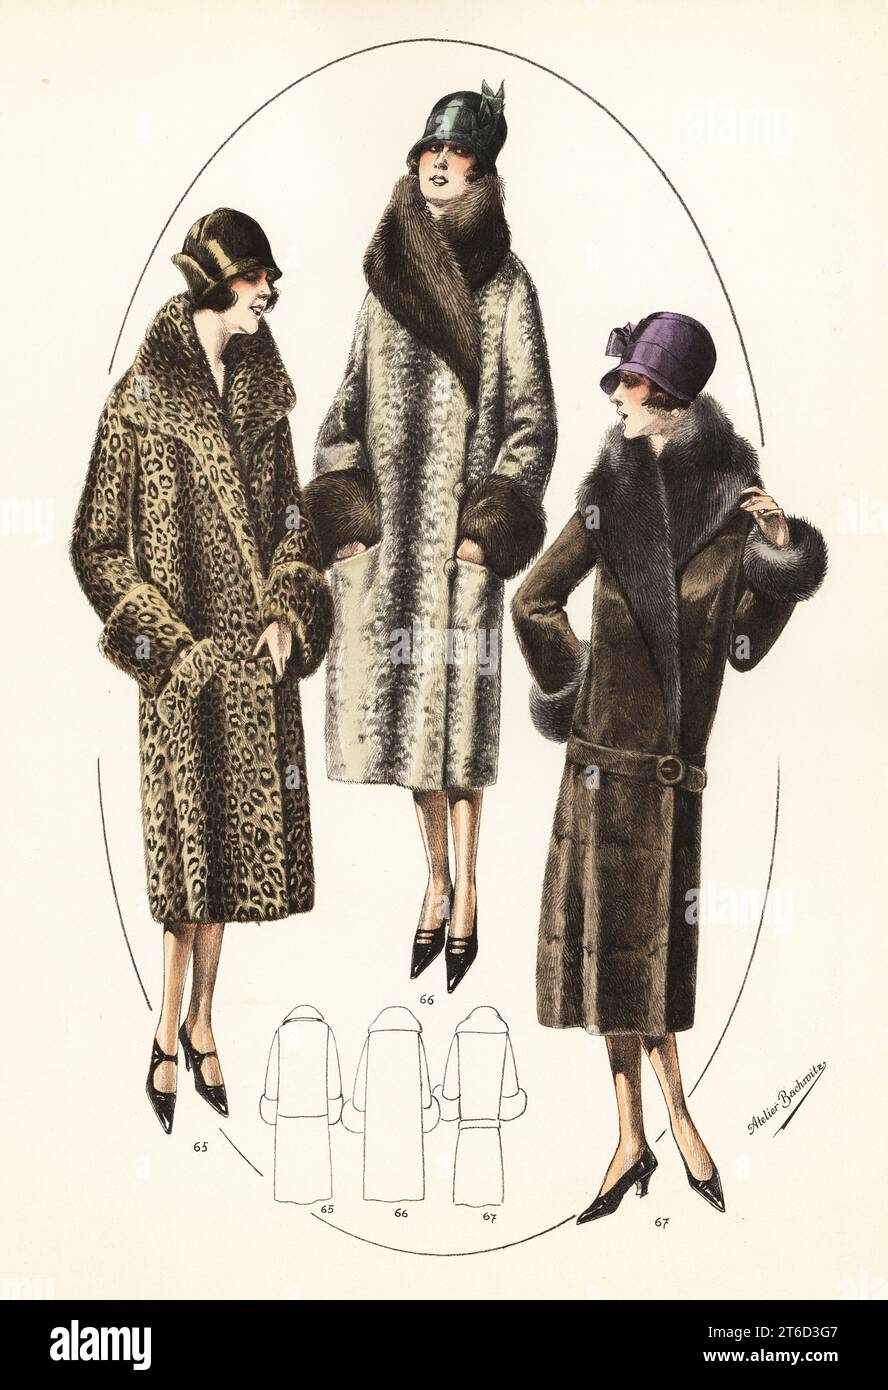 Man in town overcoat with concealed buttons carrying an umbrella, and man  in double-breasted coat wearing spats and carrying a cane. Color printed  fashion plate by W. A. Richards from the winter